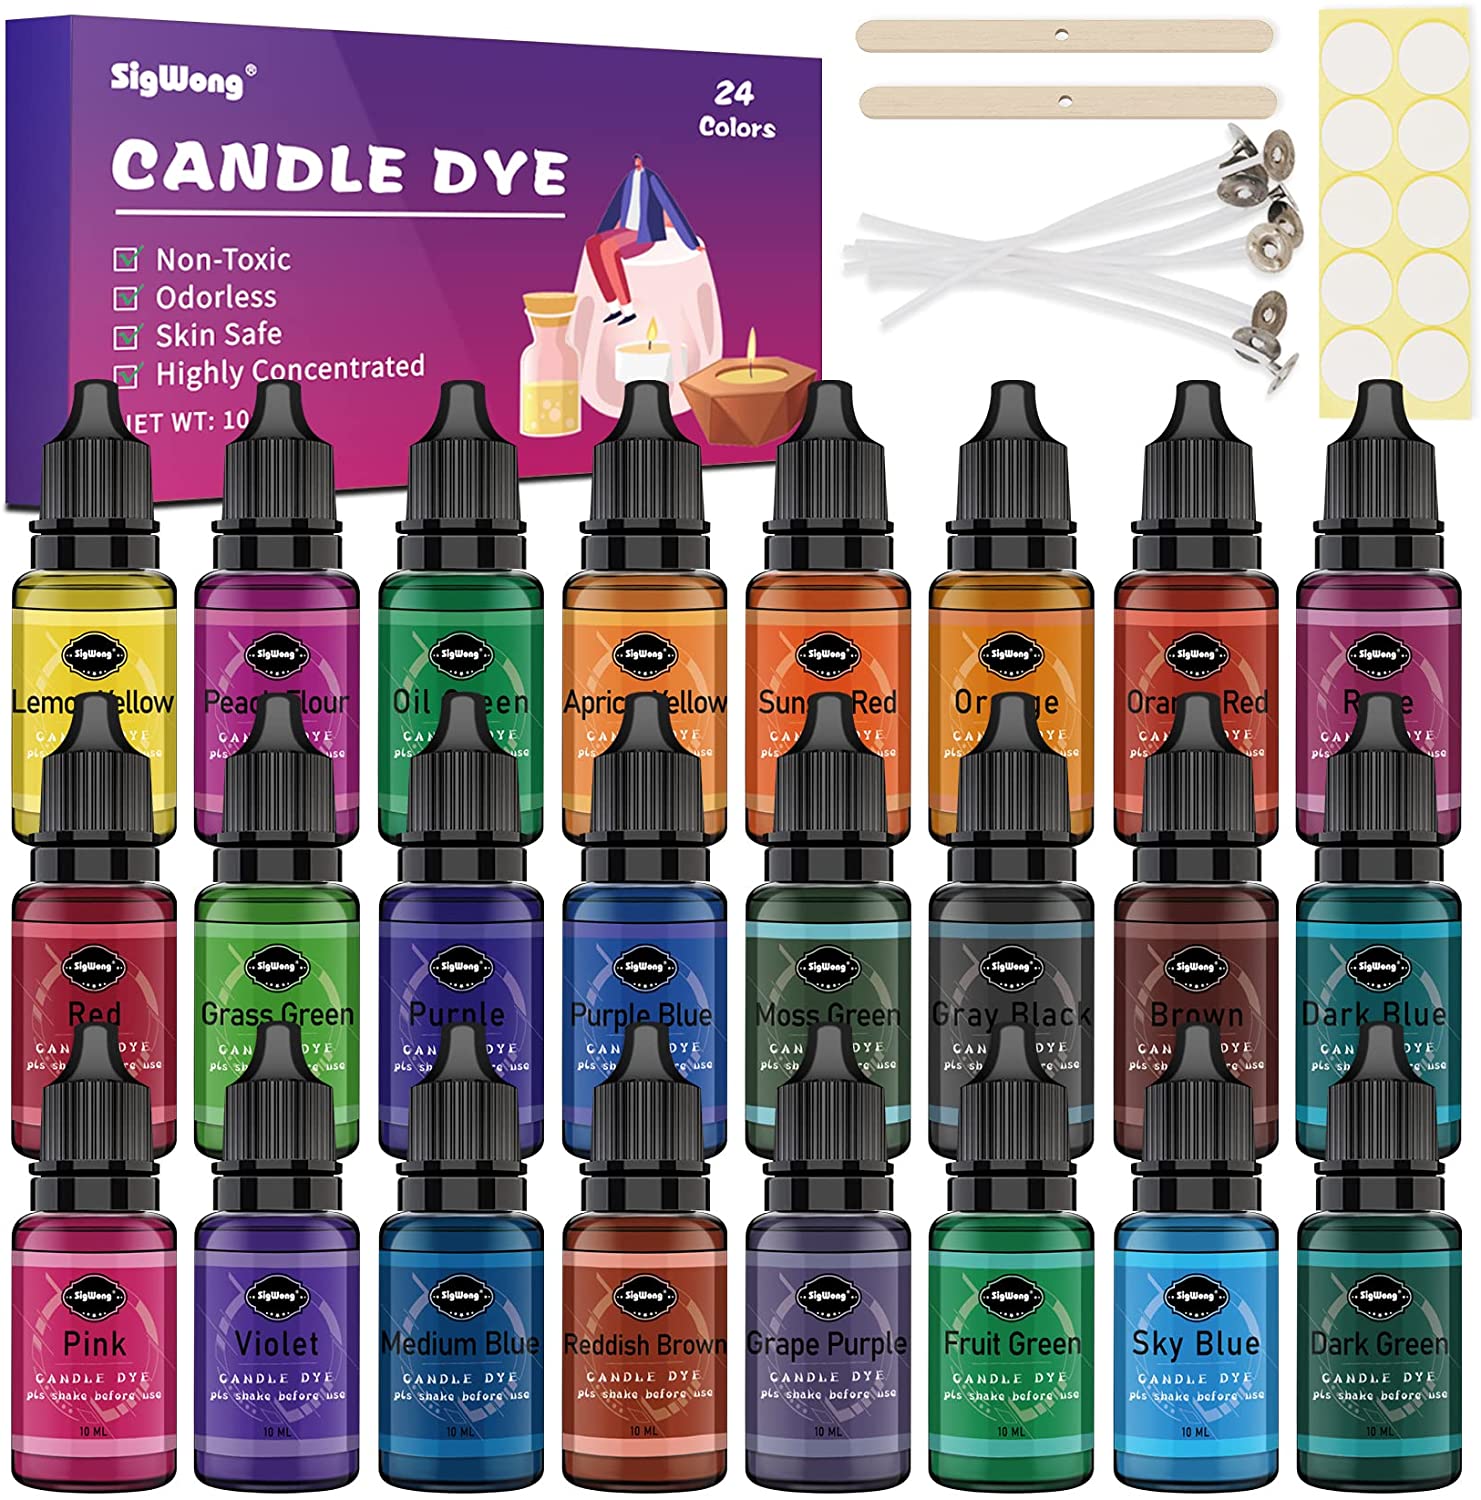 Candle Dyes For Candle Making - Wax Dyes For Candle Making - High Color Dyes  For Soybean Wax - Wax Dye Sheet - Candle Wax Dye Sheet - High Handle Dyes  For